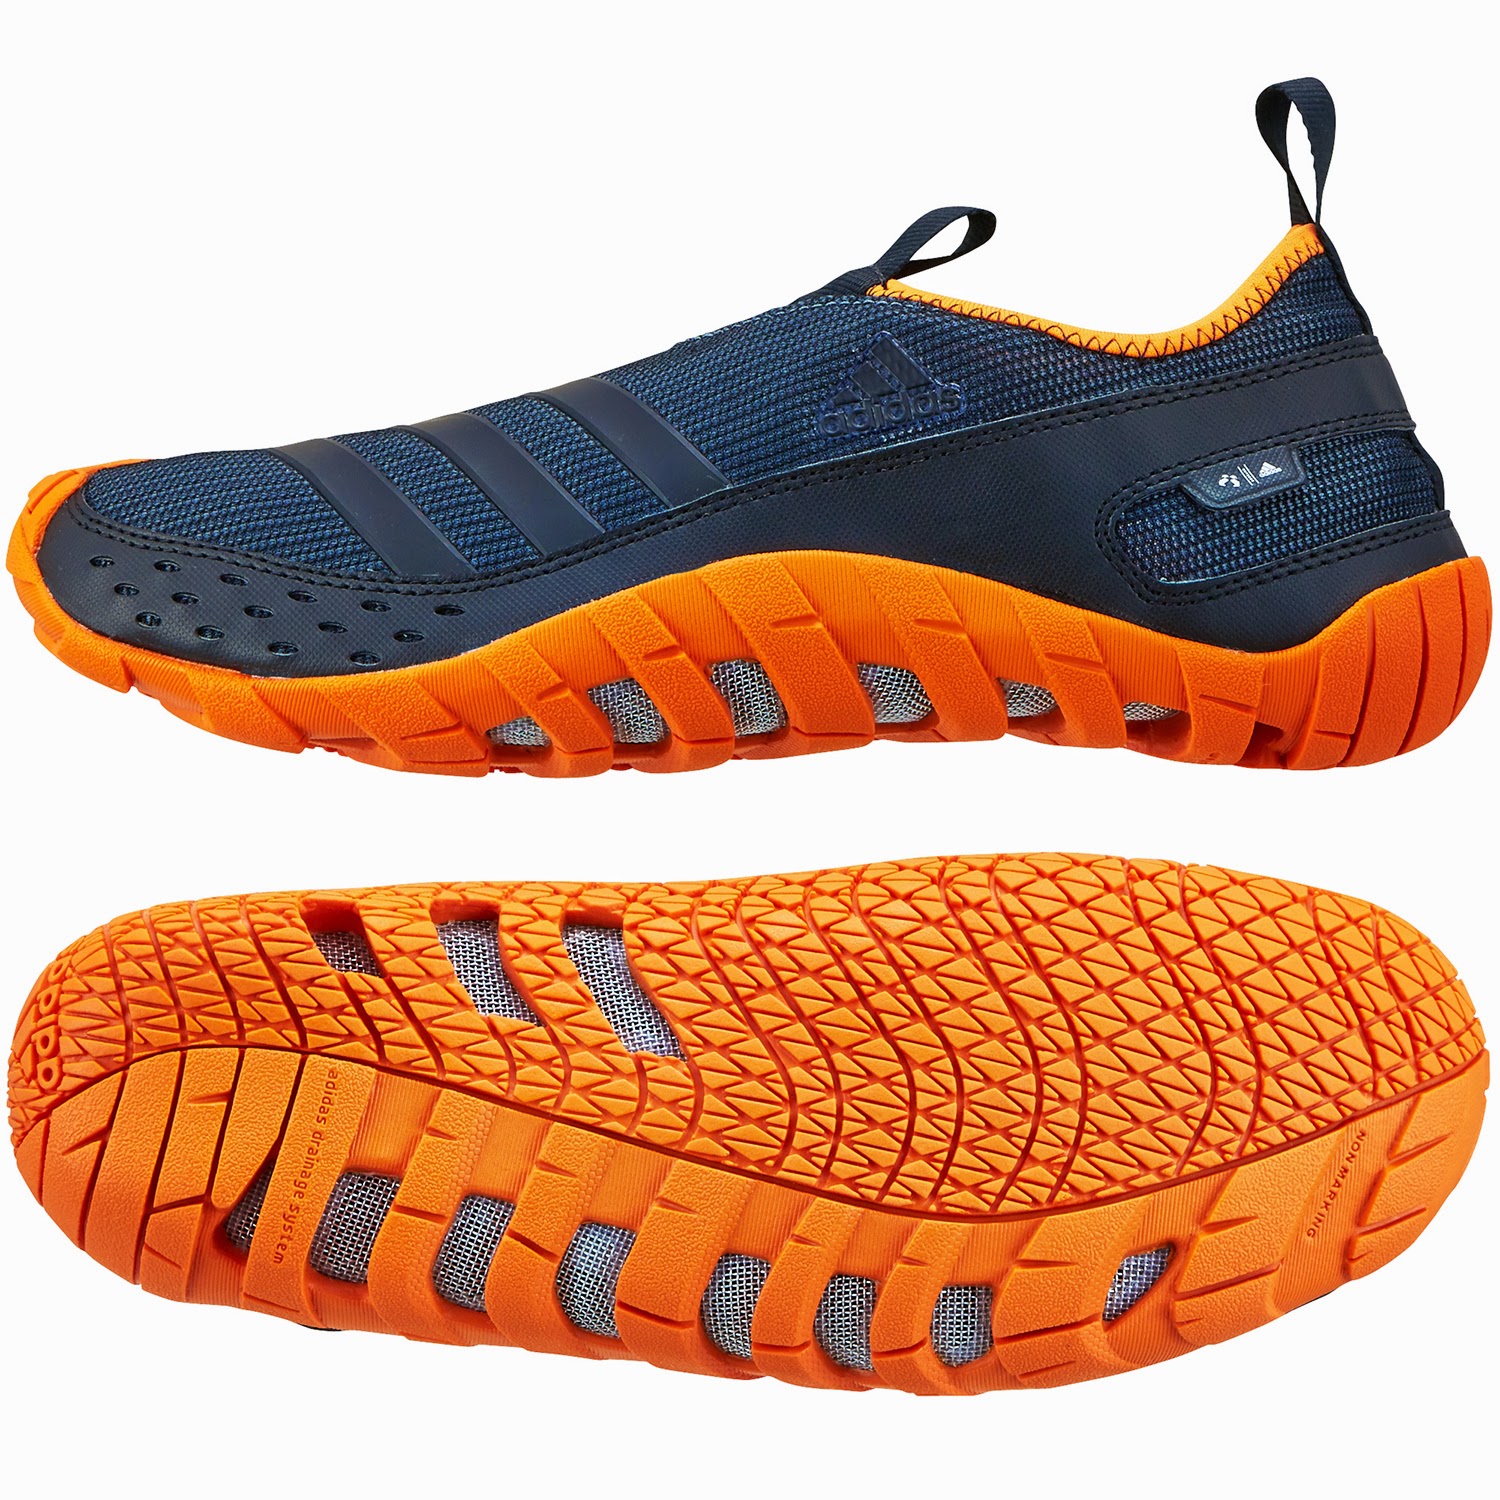 Professional Atheletic News: Adidas JAWPAW II Men's Water Sports Shoes